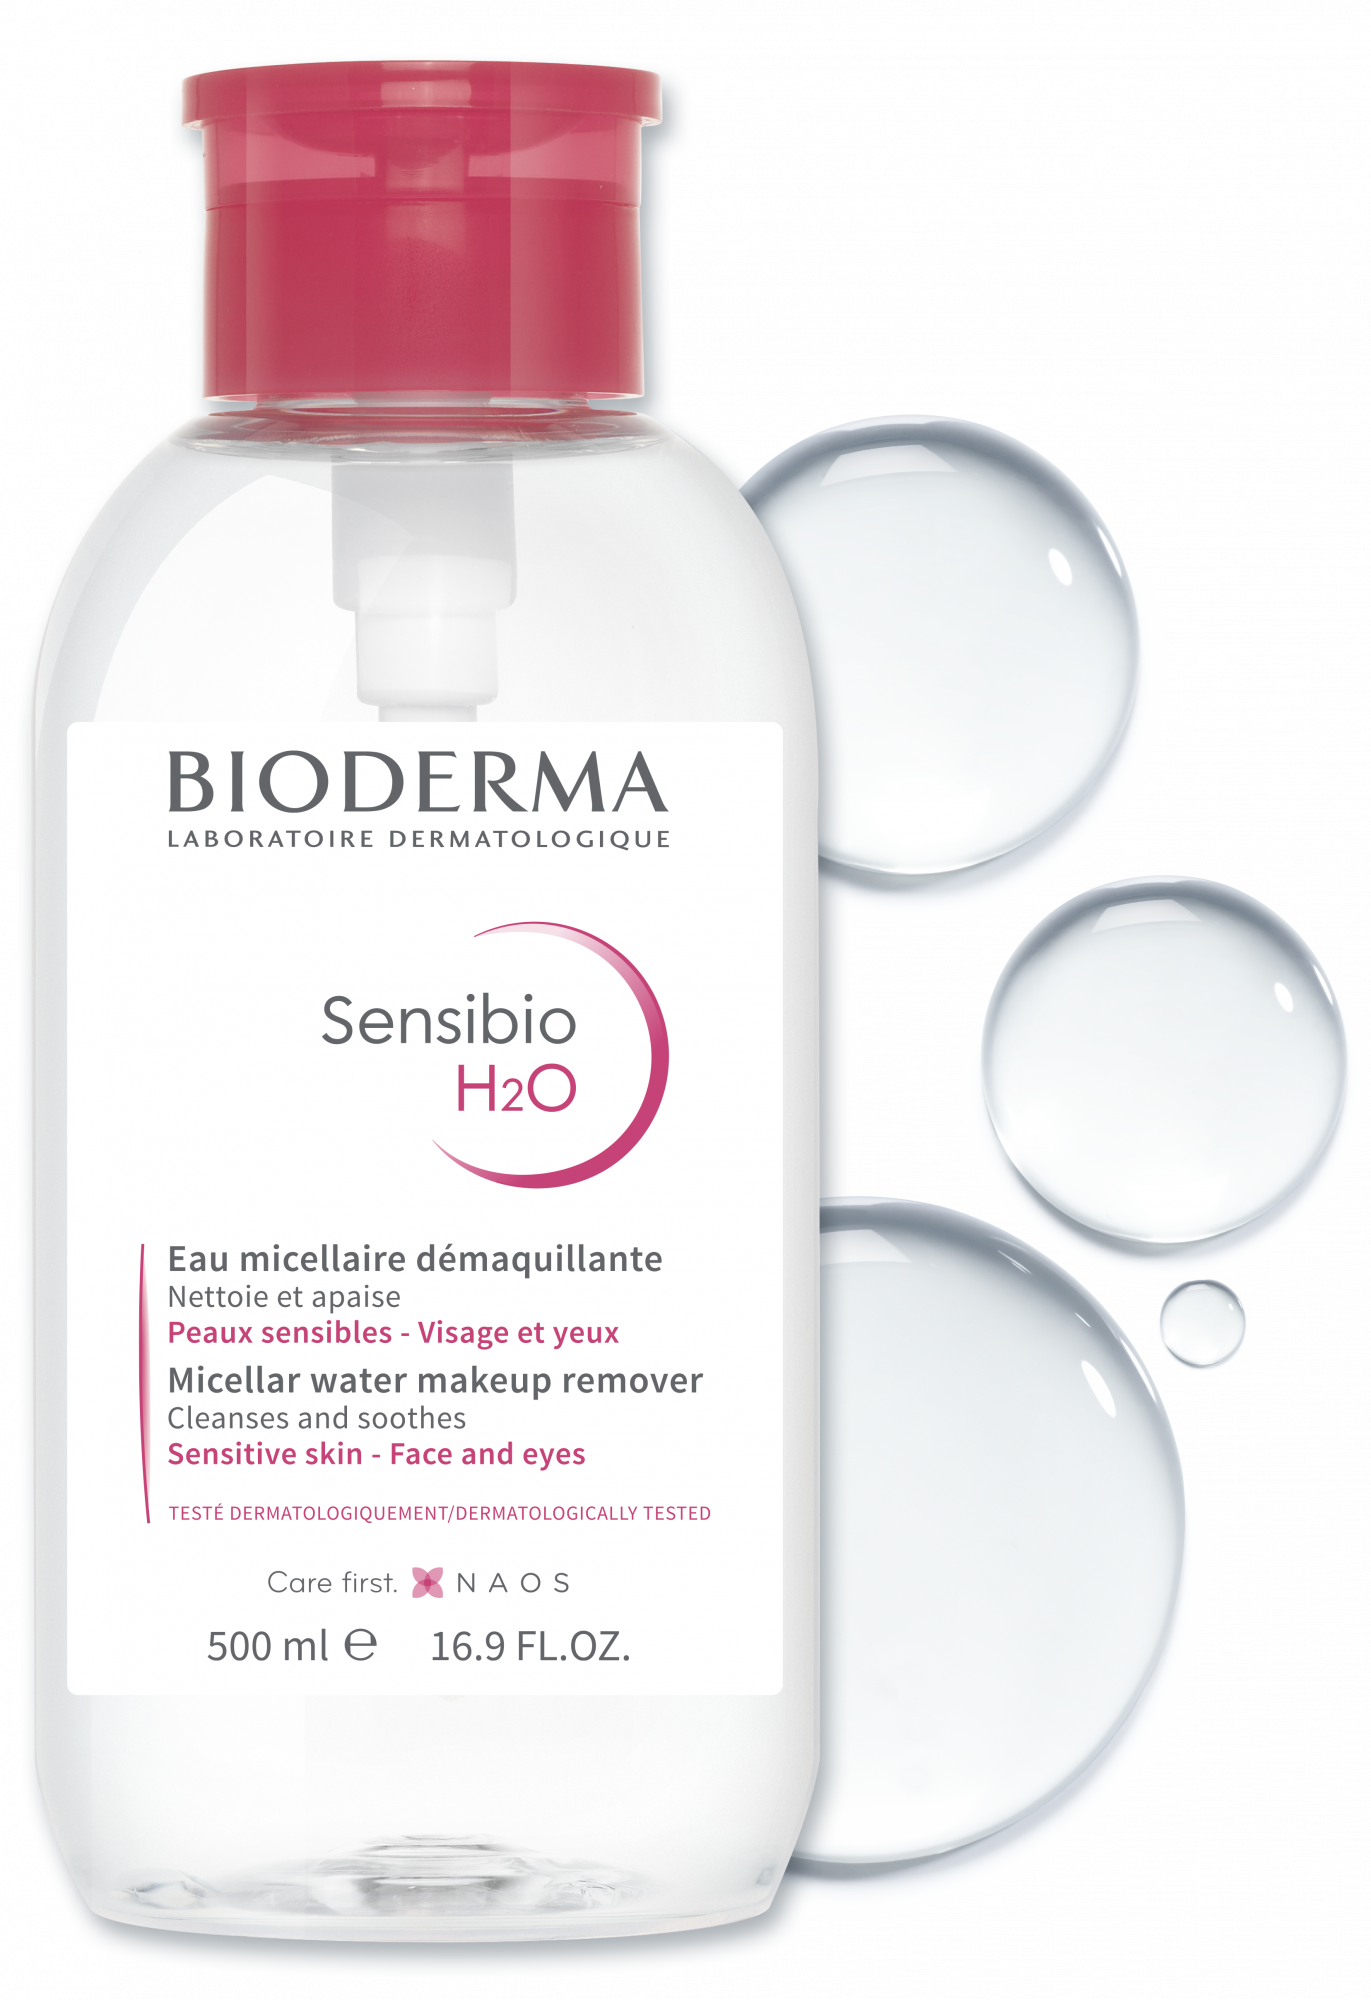 About the Brand: BIODERMA